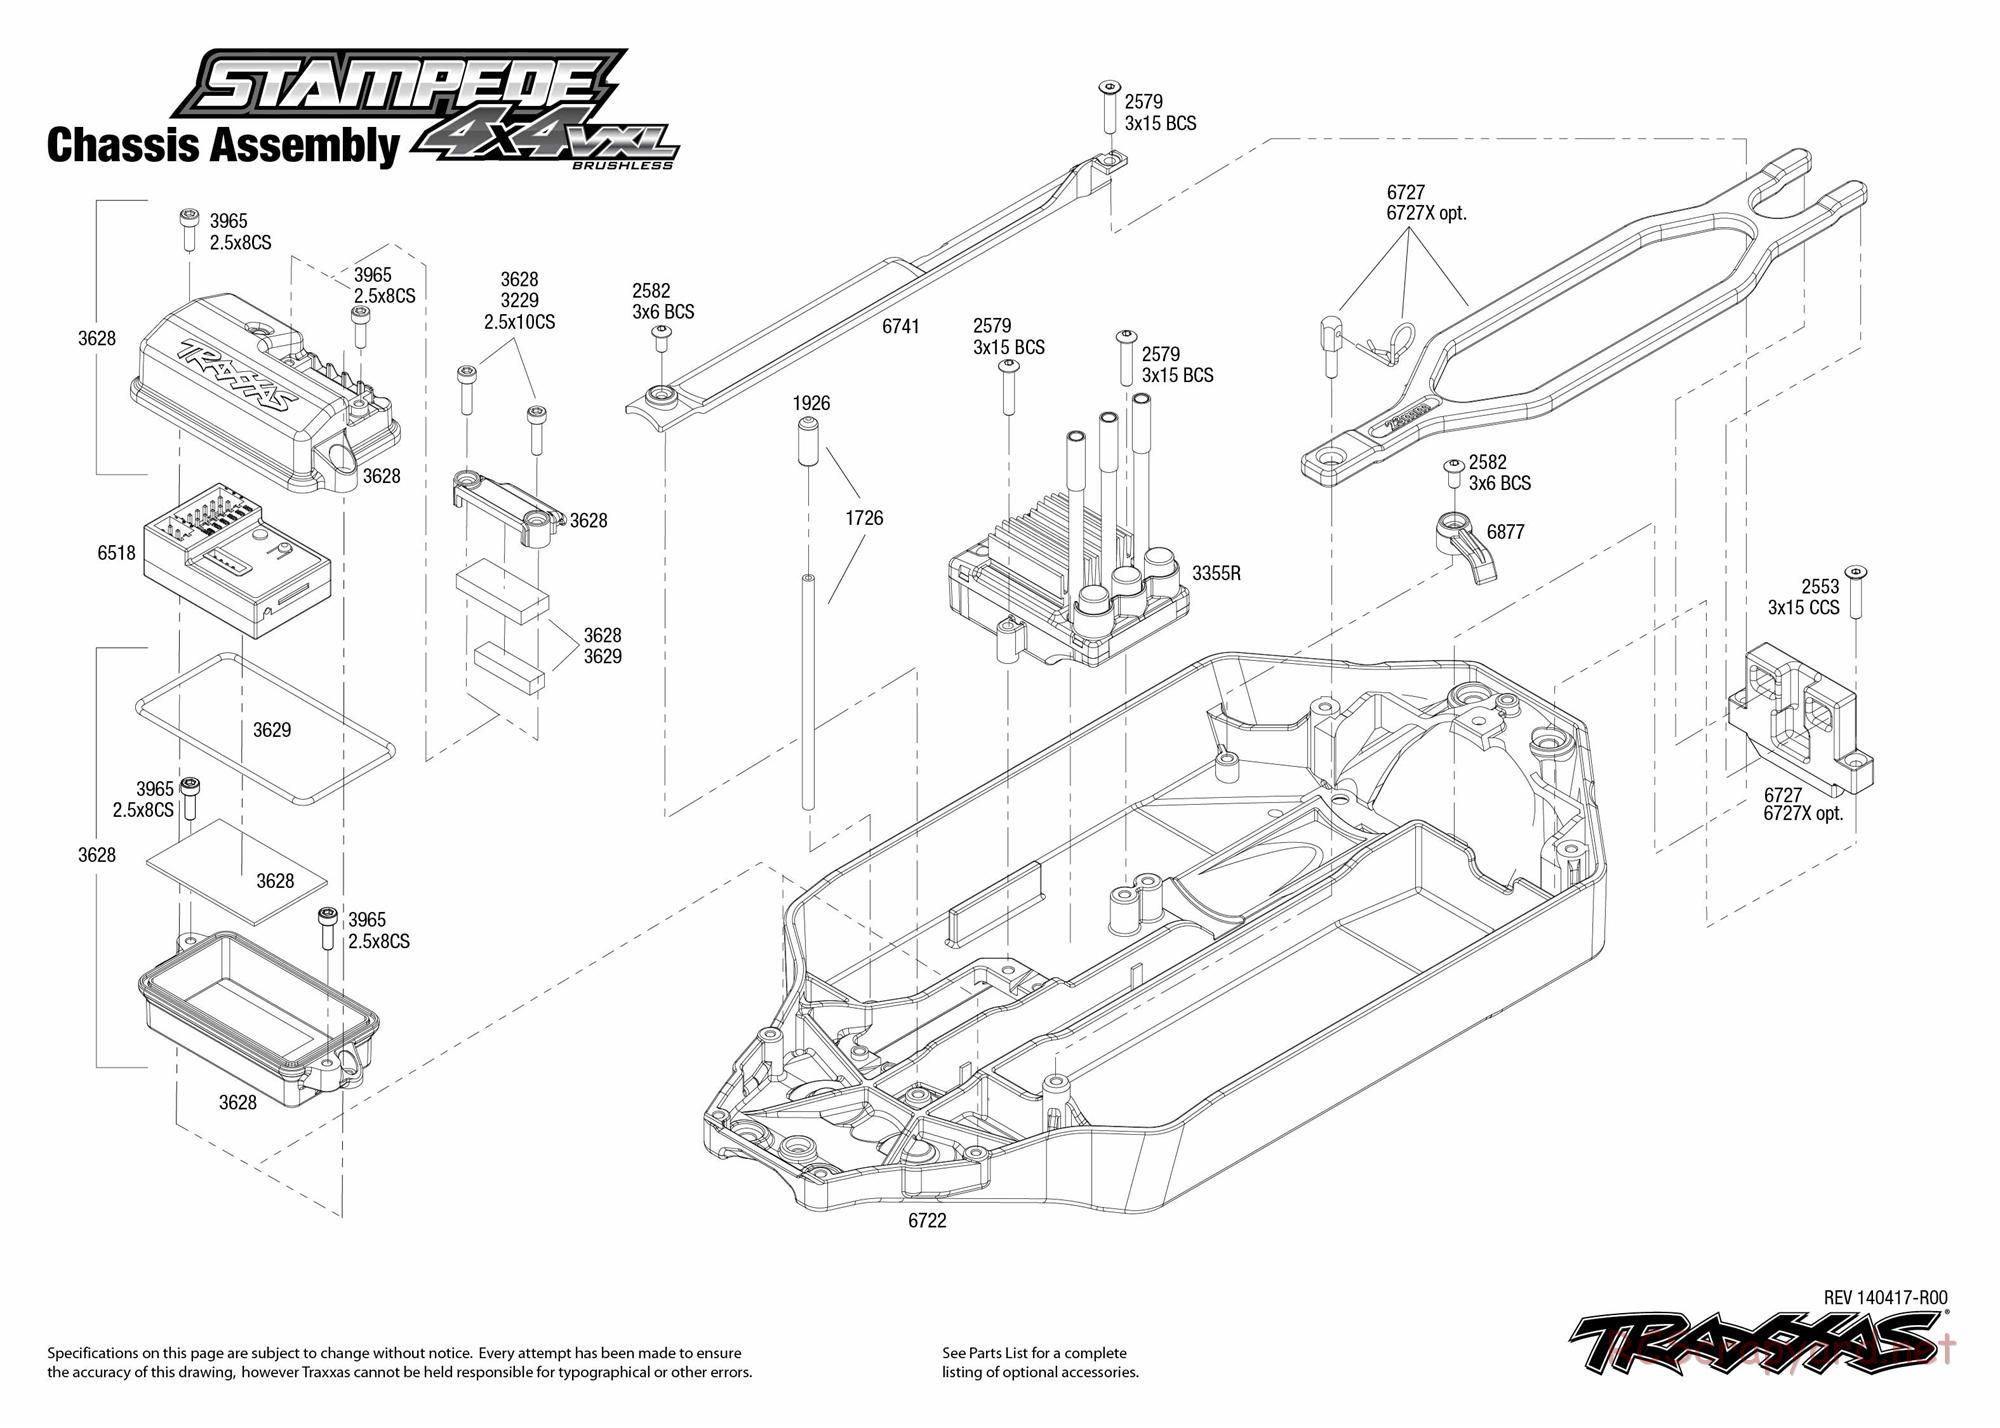 Traxxas - Stampede 4x4 VXL (2014) - Exploded Views - Page 1